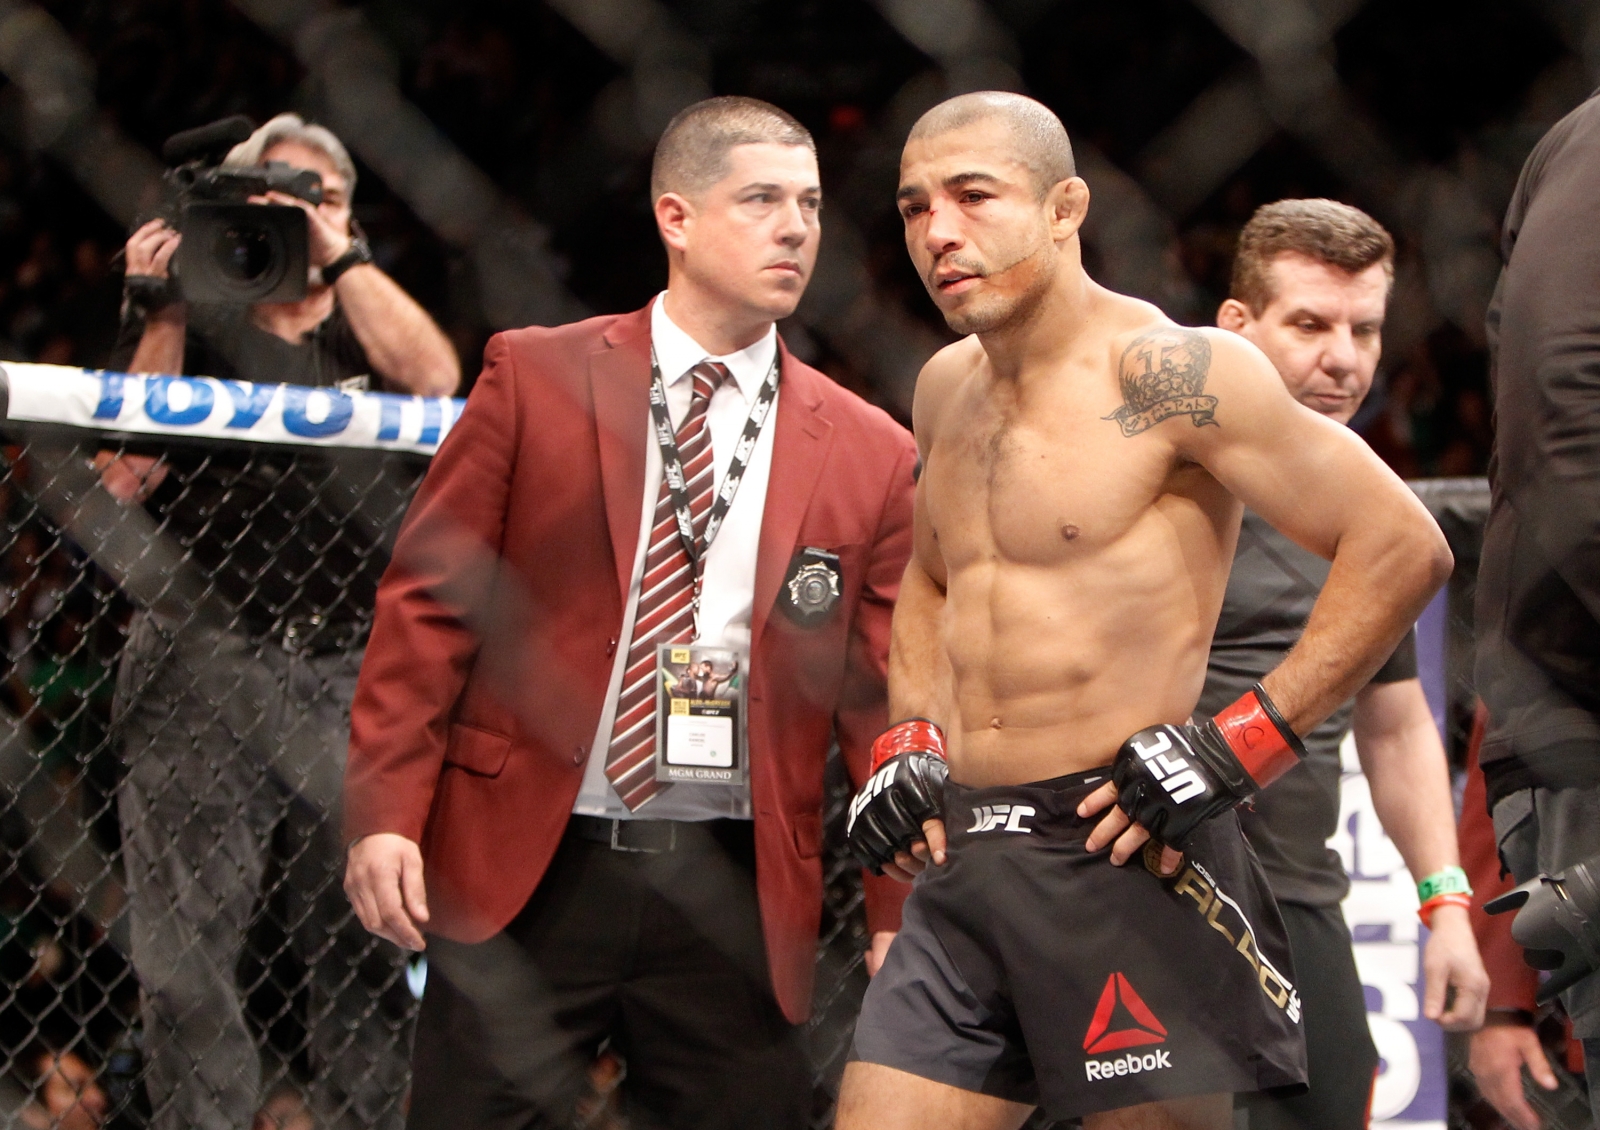 Jose Aldo? All the facts, journey and the story behind that facial scar